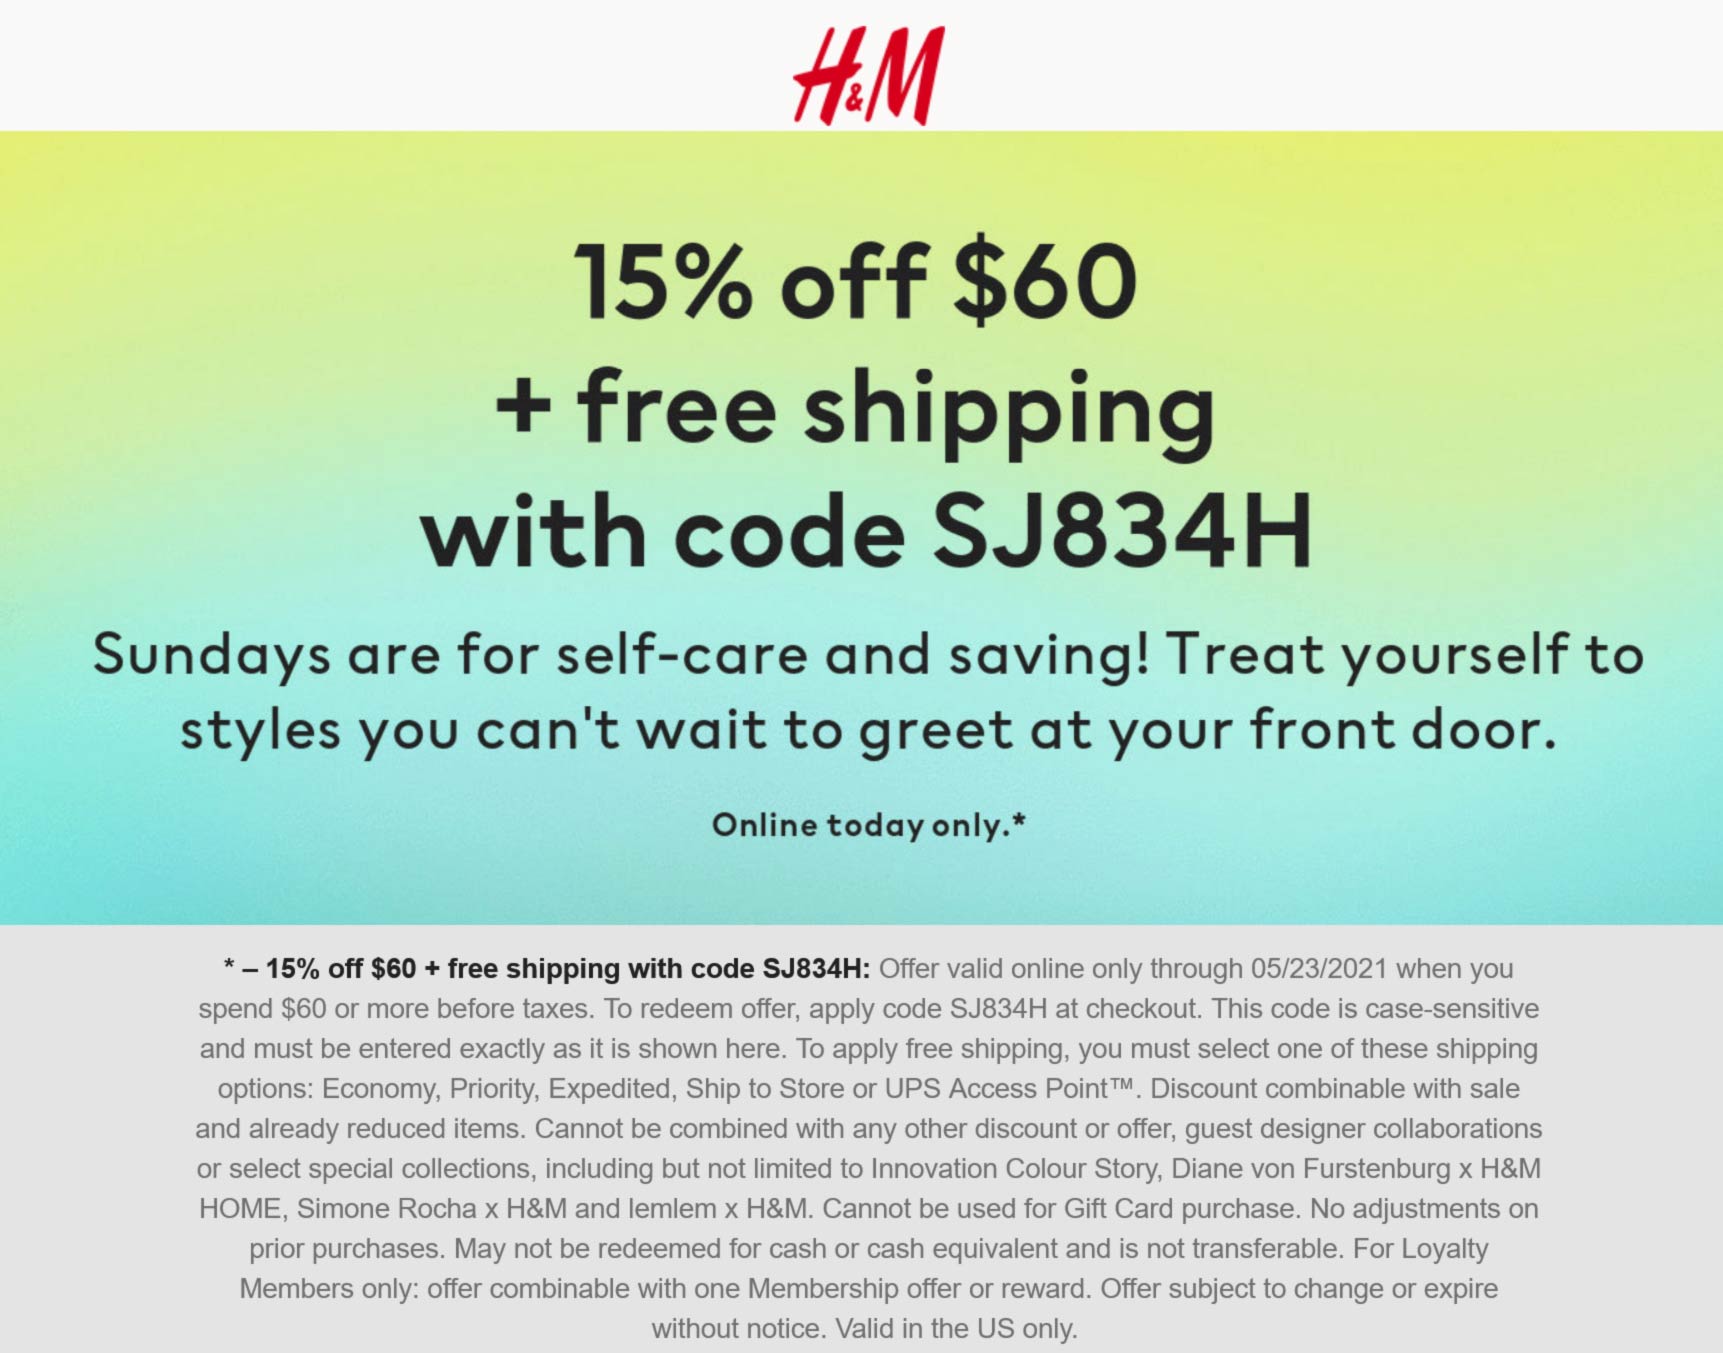 H&M stores Coupon  15% off $60 online today at H&M via promo code SJ834H #hm 